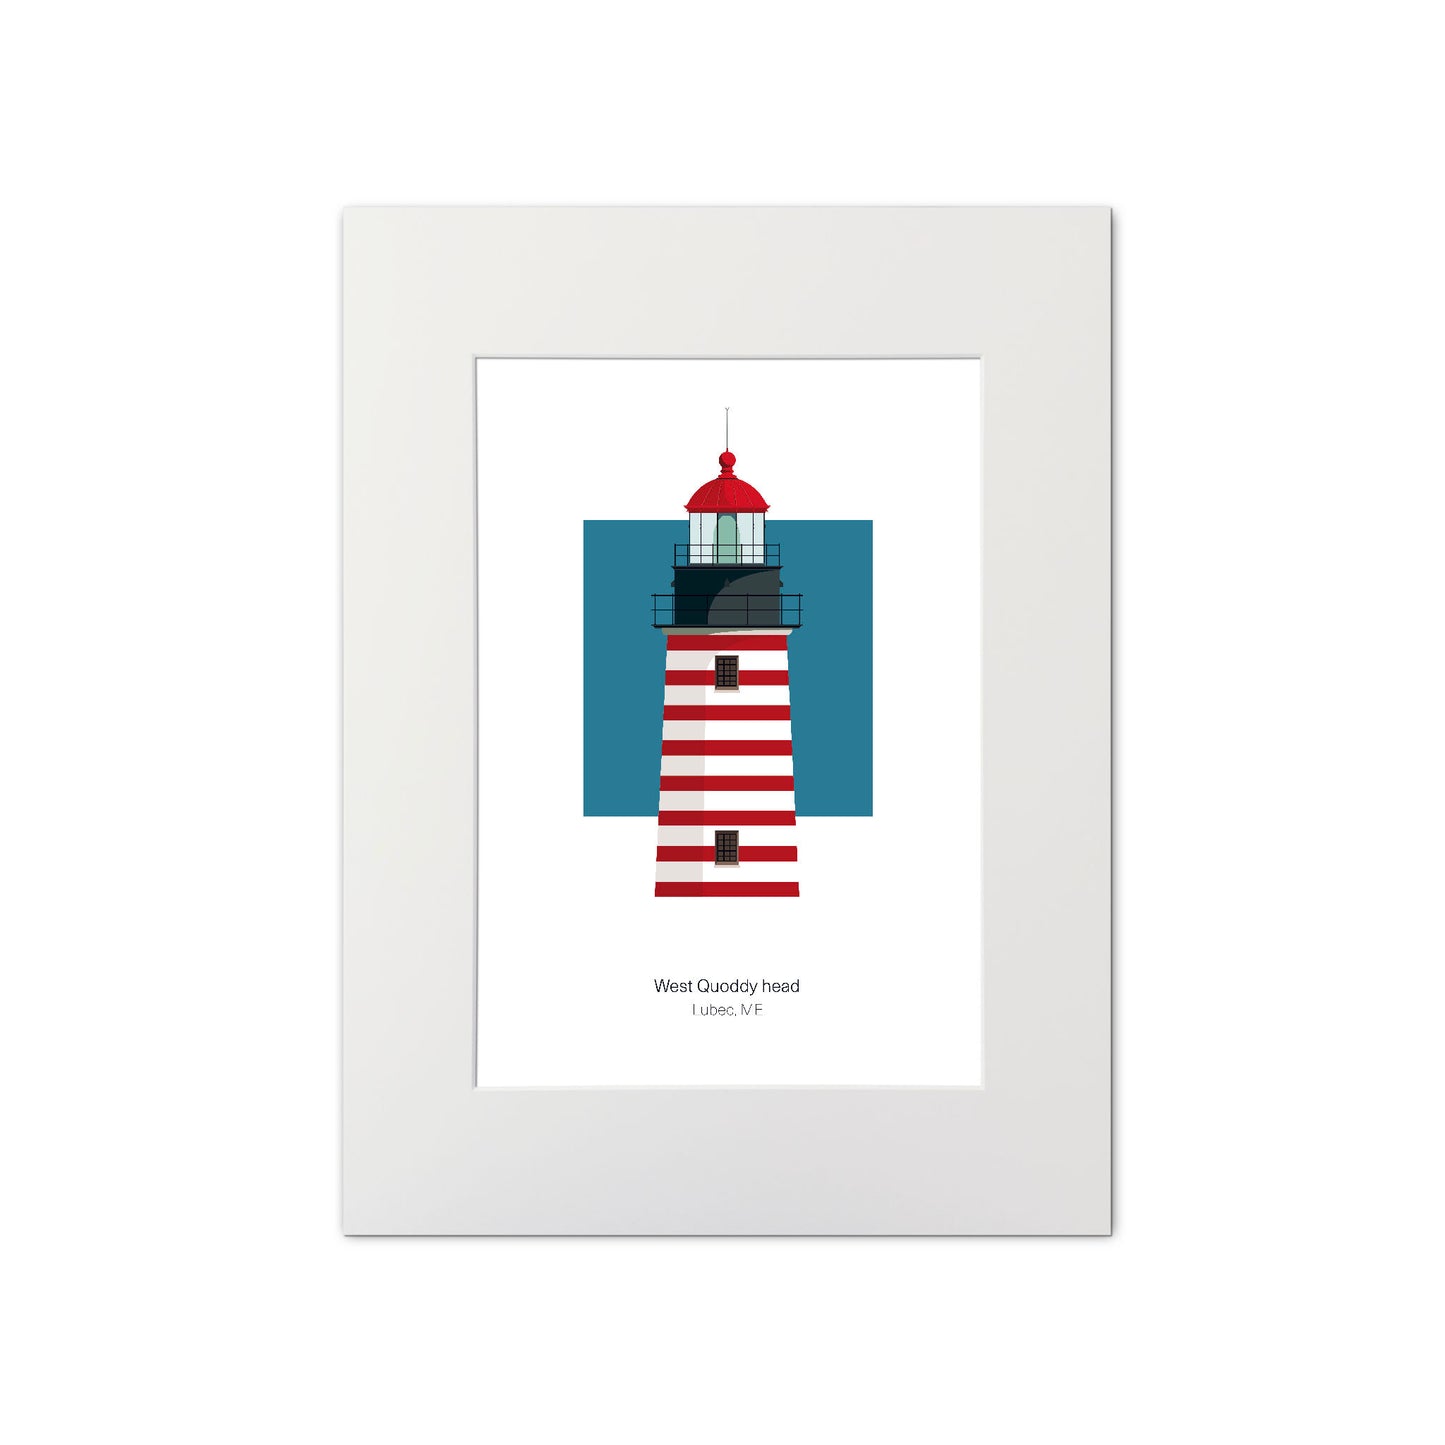 Illustration of the West Quoddy Head lighthouse, Maine, USA. On a white background with aqua blue square as a backdrop., mounted and measuring 11"x14" (30x40cm).